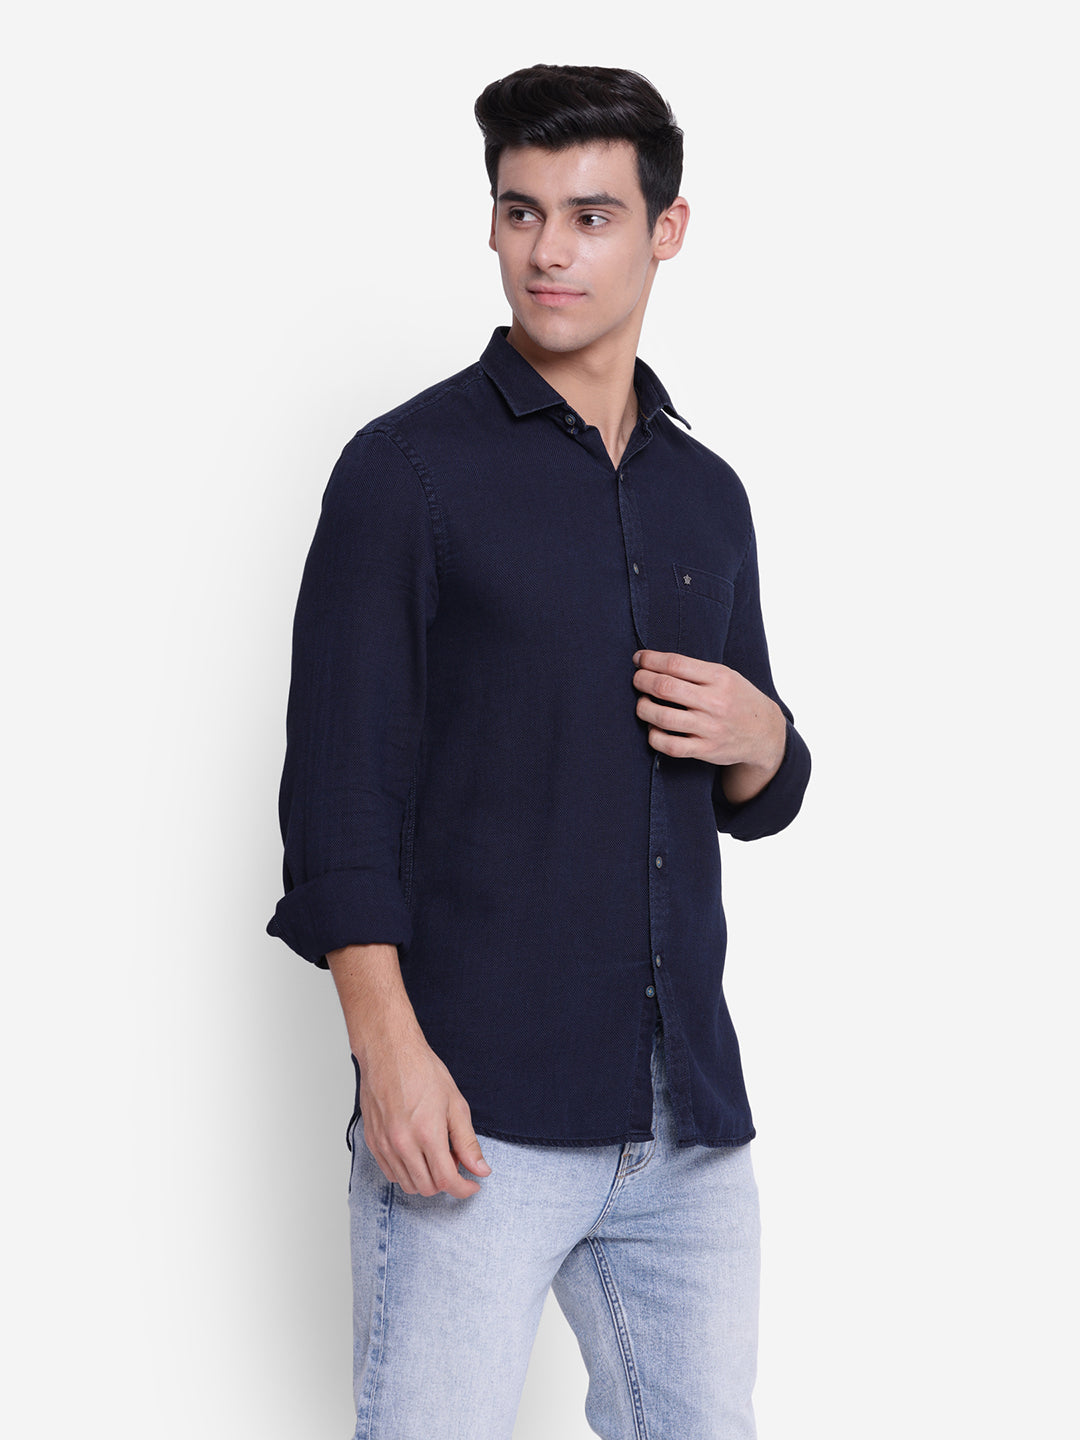 Solid Navy Blue Slim Fit Causal Shirt